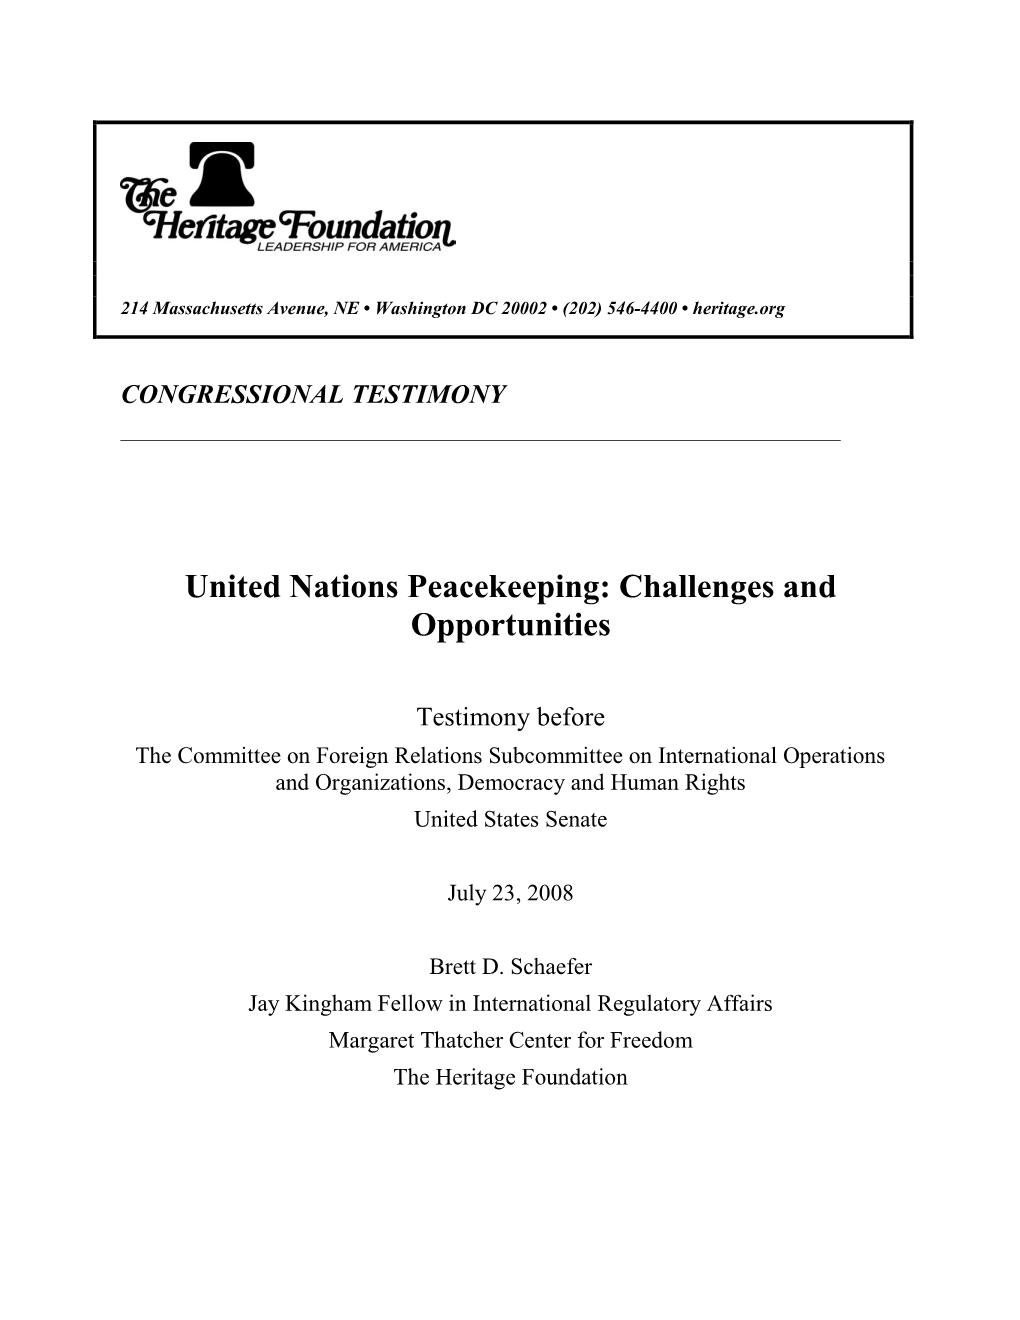 United Nations Peacekeeping: Challenges and Opportunities